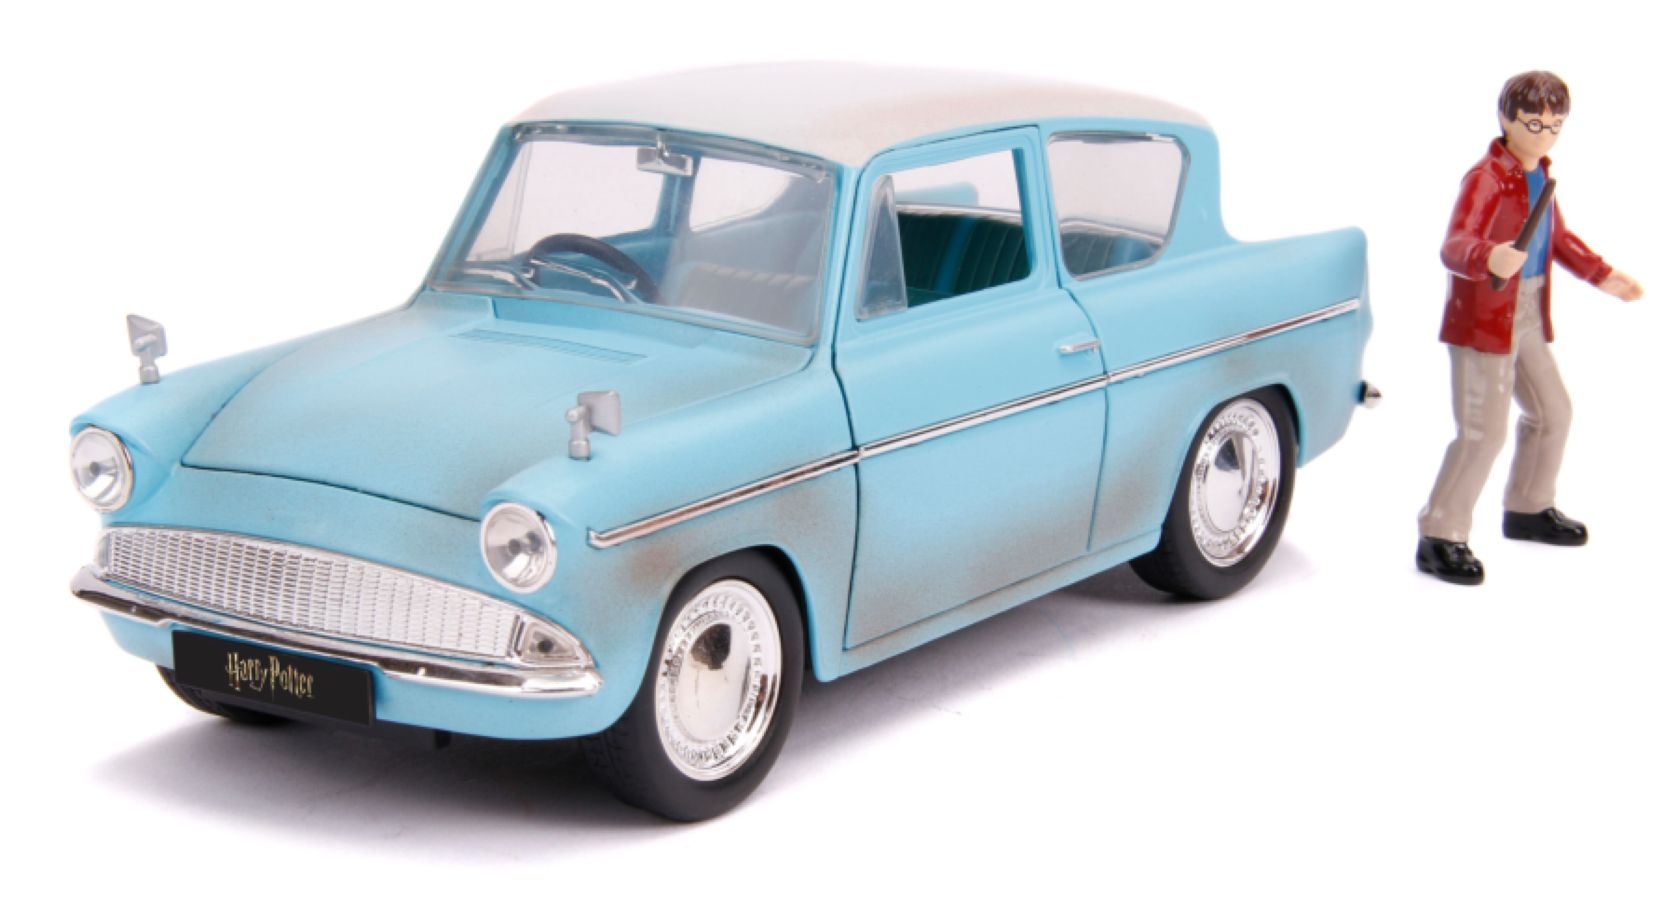 HARRY POTTER – 1959 FORD ANGLIA 1:24 HOLLYWOOD RIDE